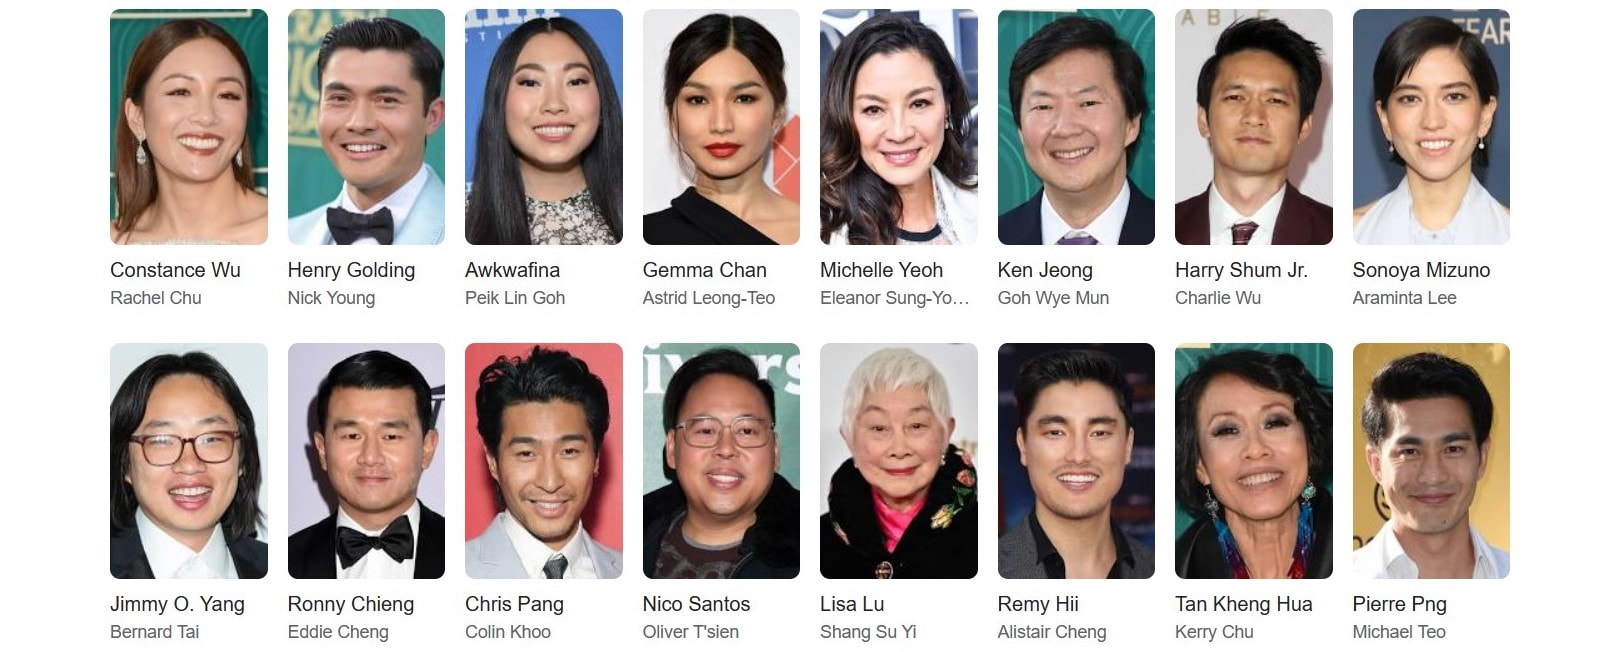 the cast from Crazy Rich Asians